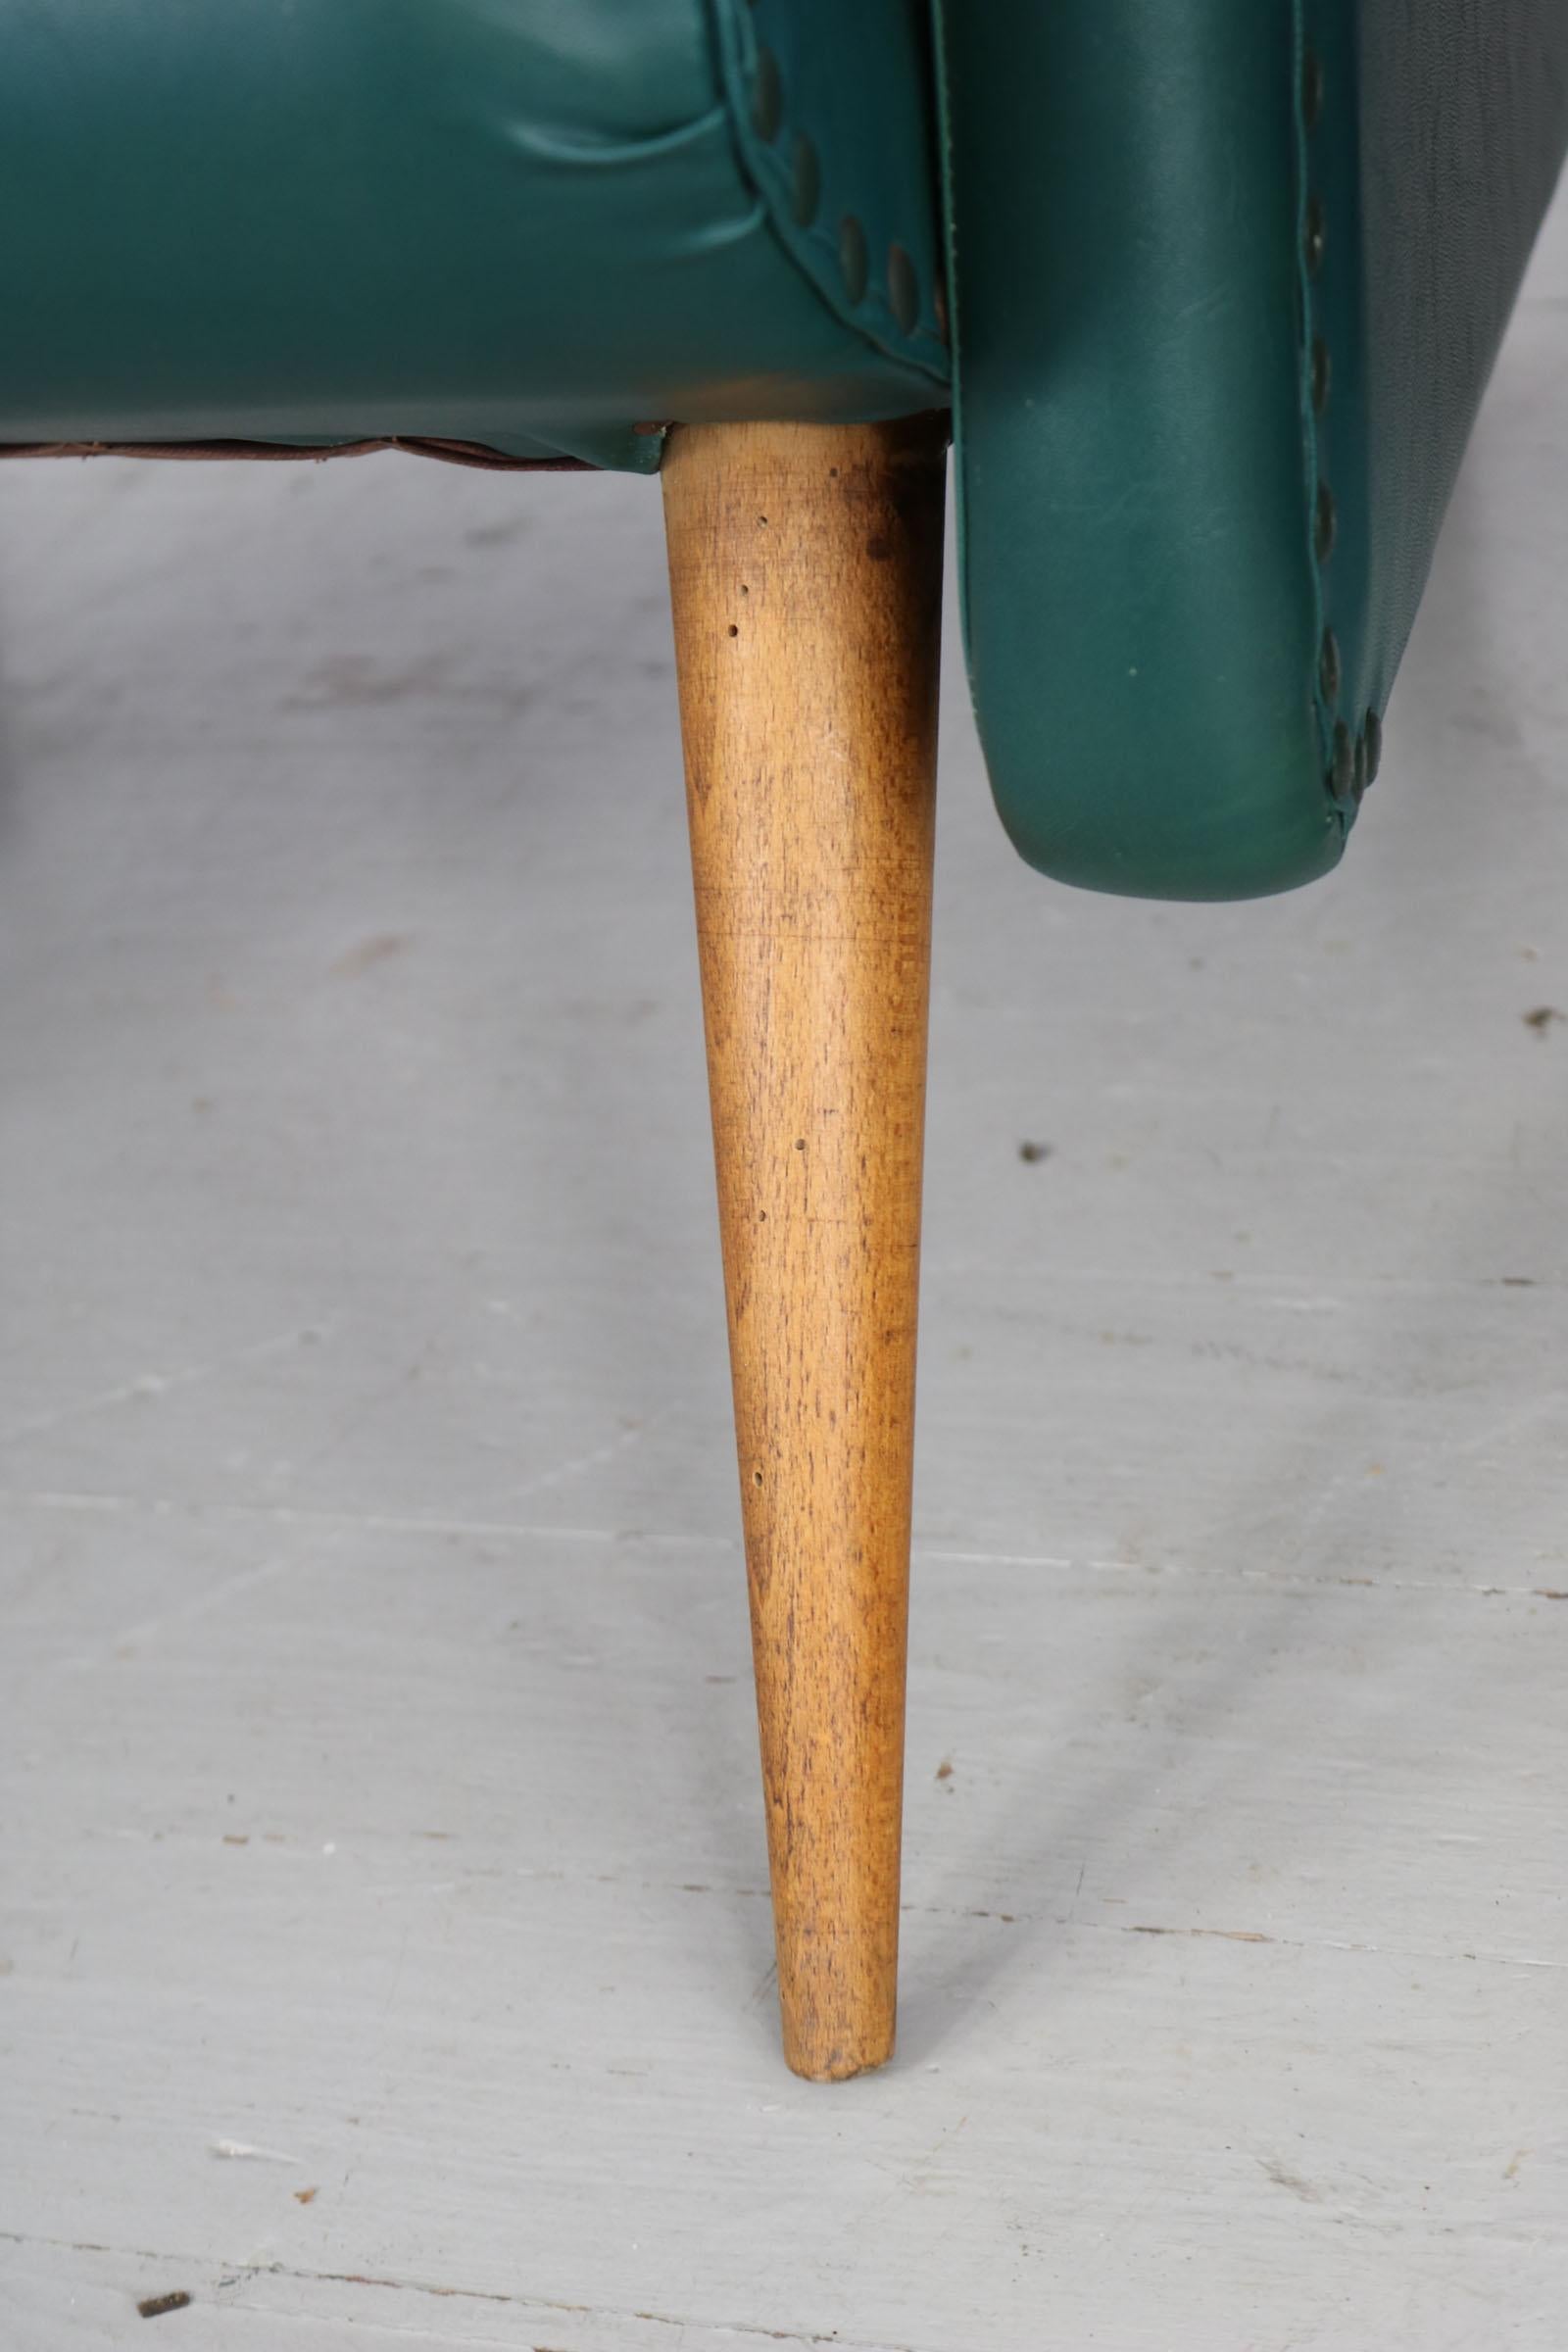 Pair of Italian Chairs in Original Green Imitation Leather Upholstery, 1950 For Sale 9